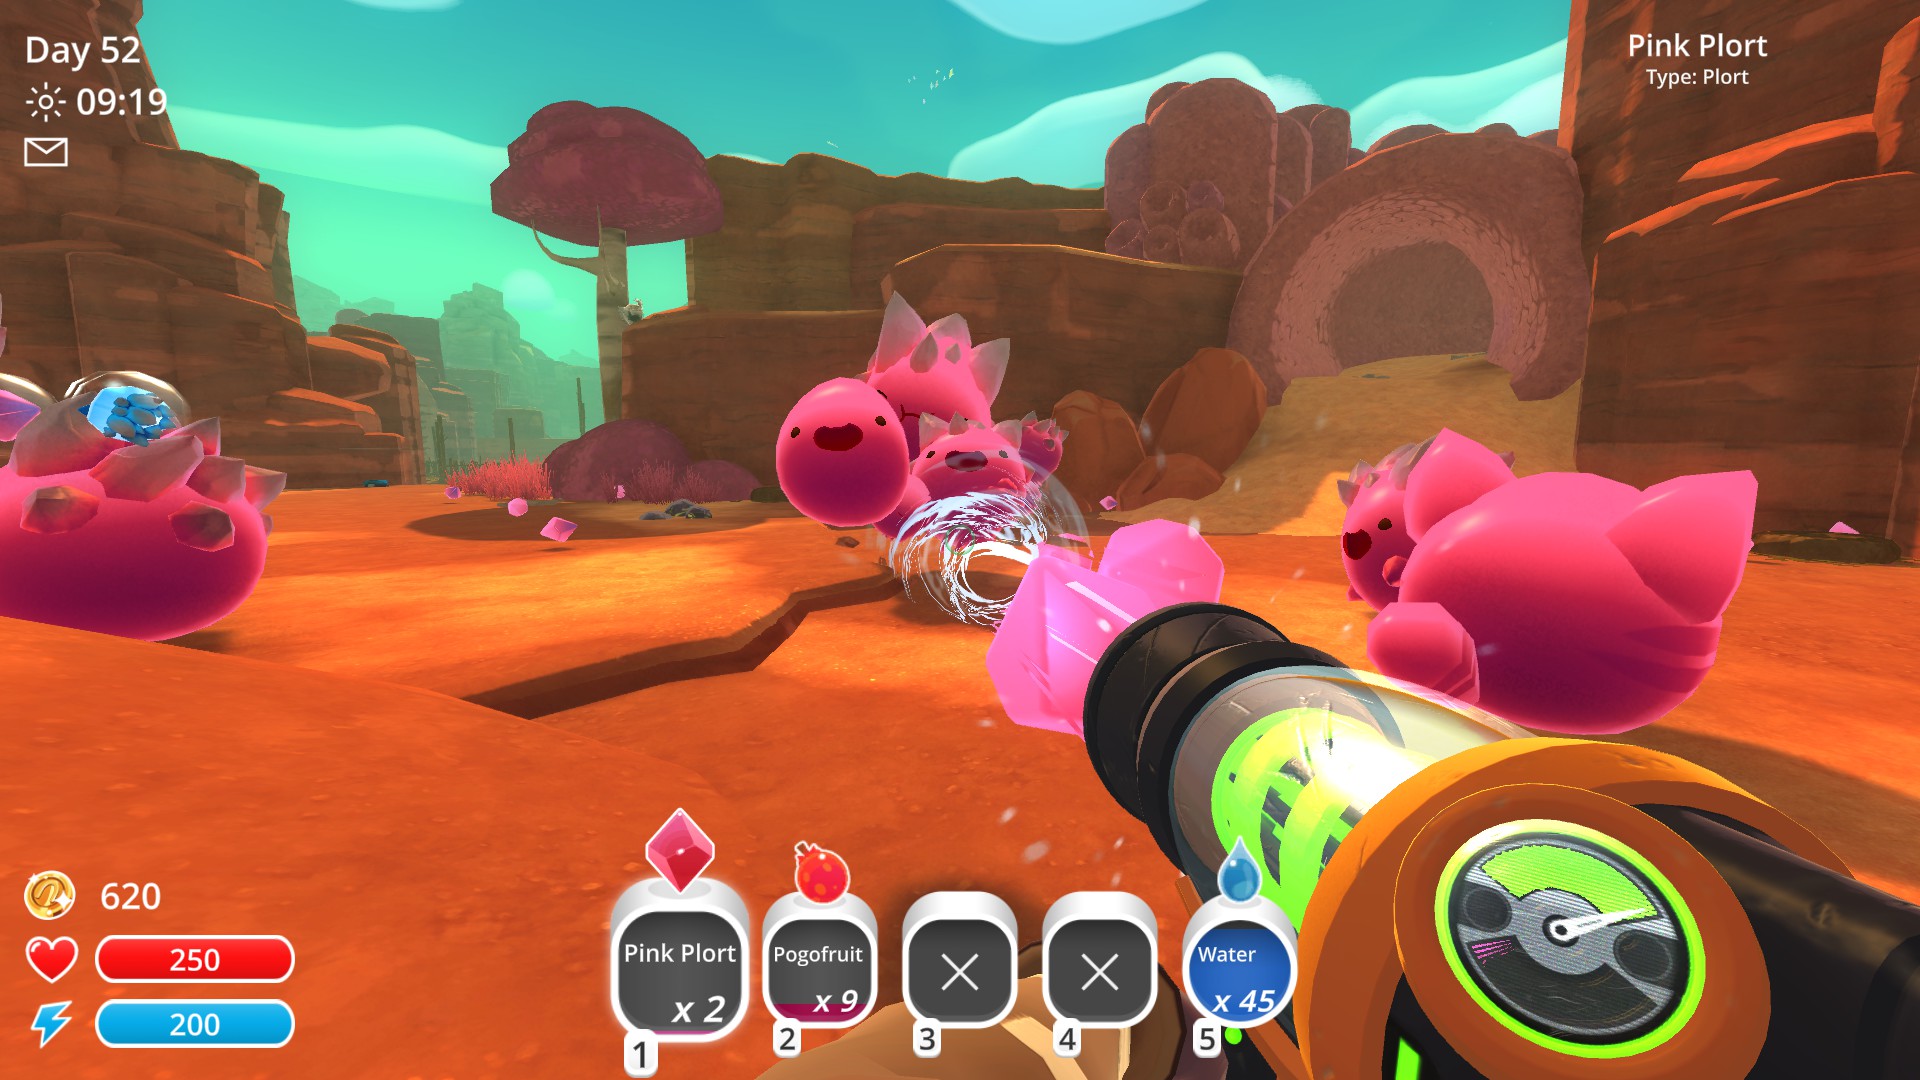 Buy Slime Rancher 2 from the Humble Store